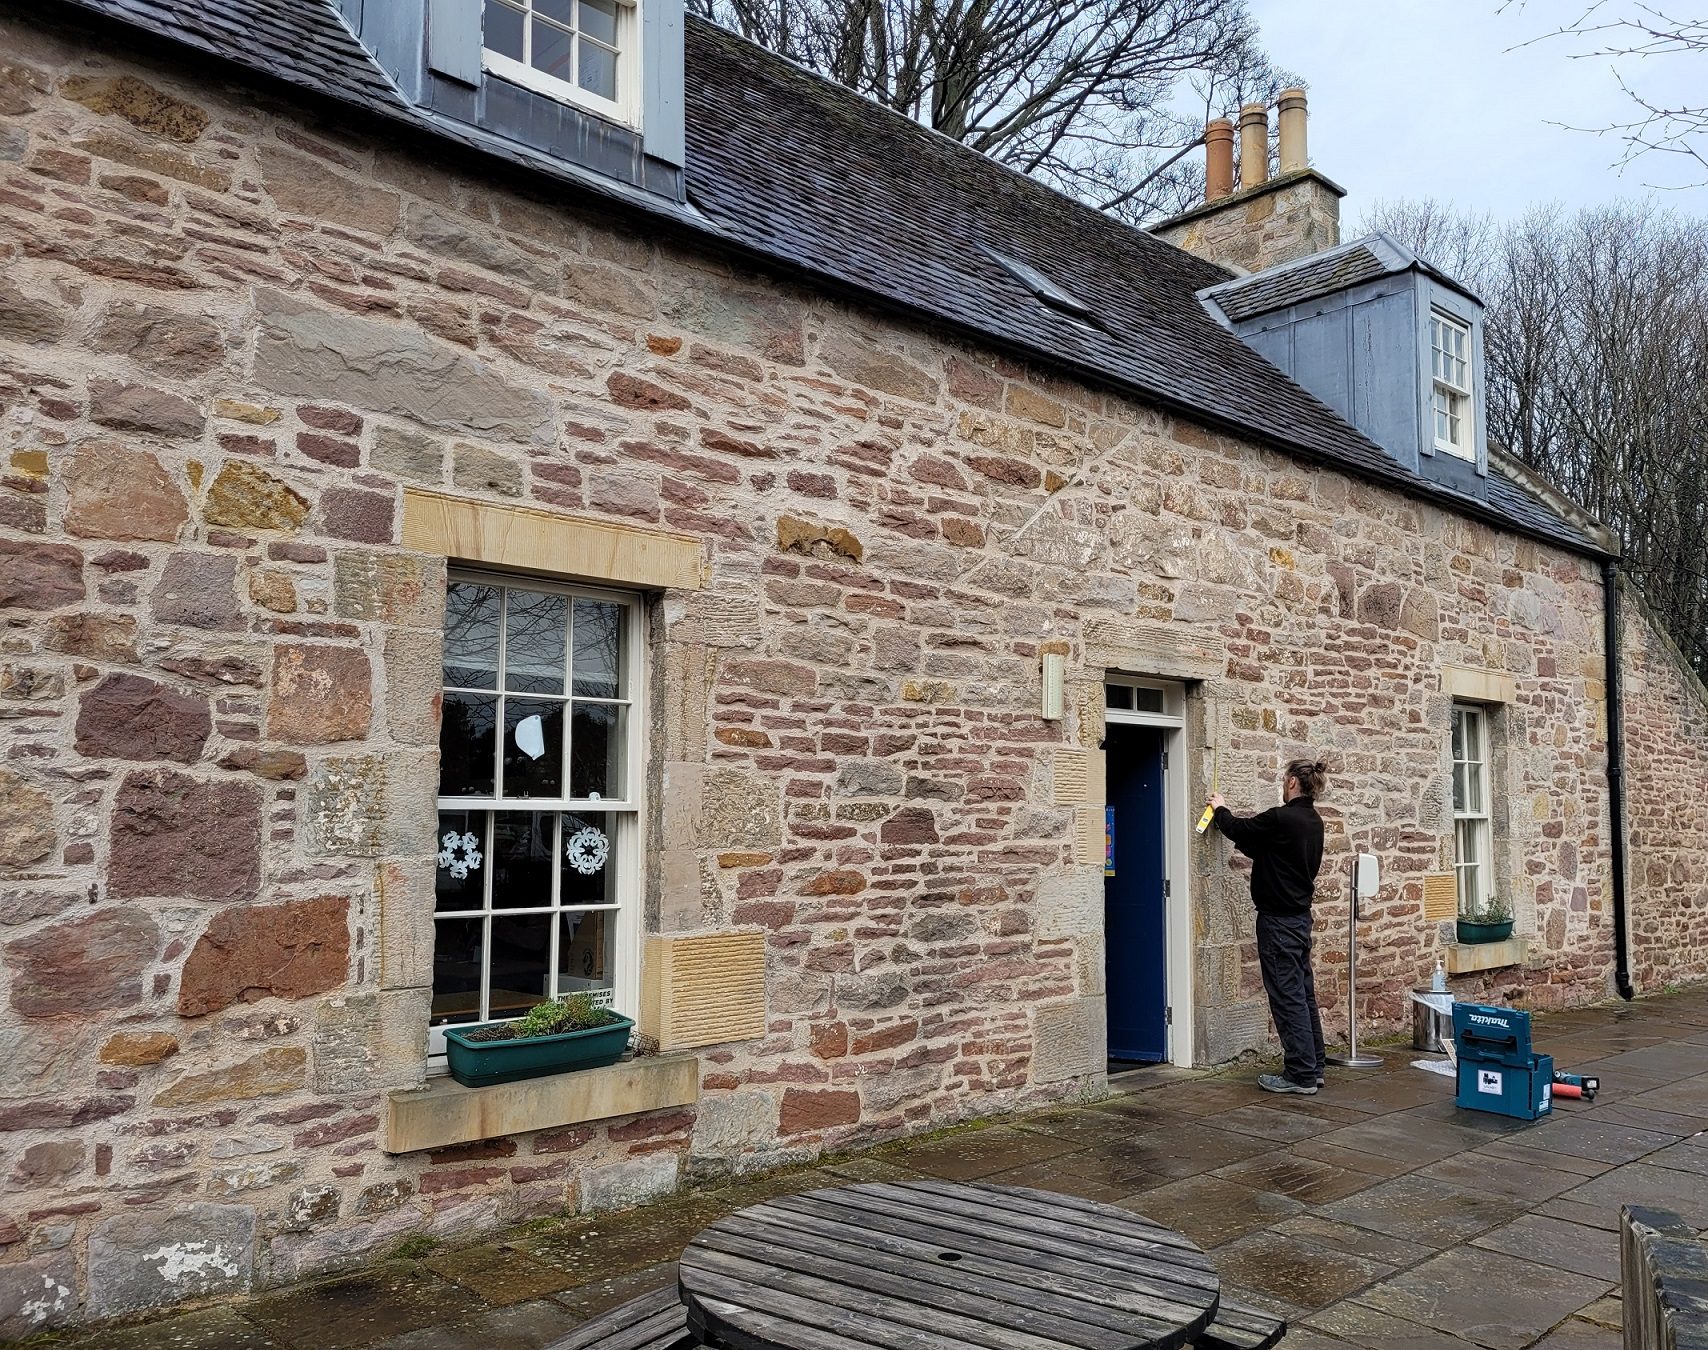 Photo outside of Liberton bank House with a person drilling a hole in the wall and another person in high-vis jacket standing by.